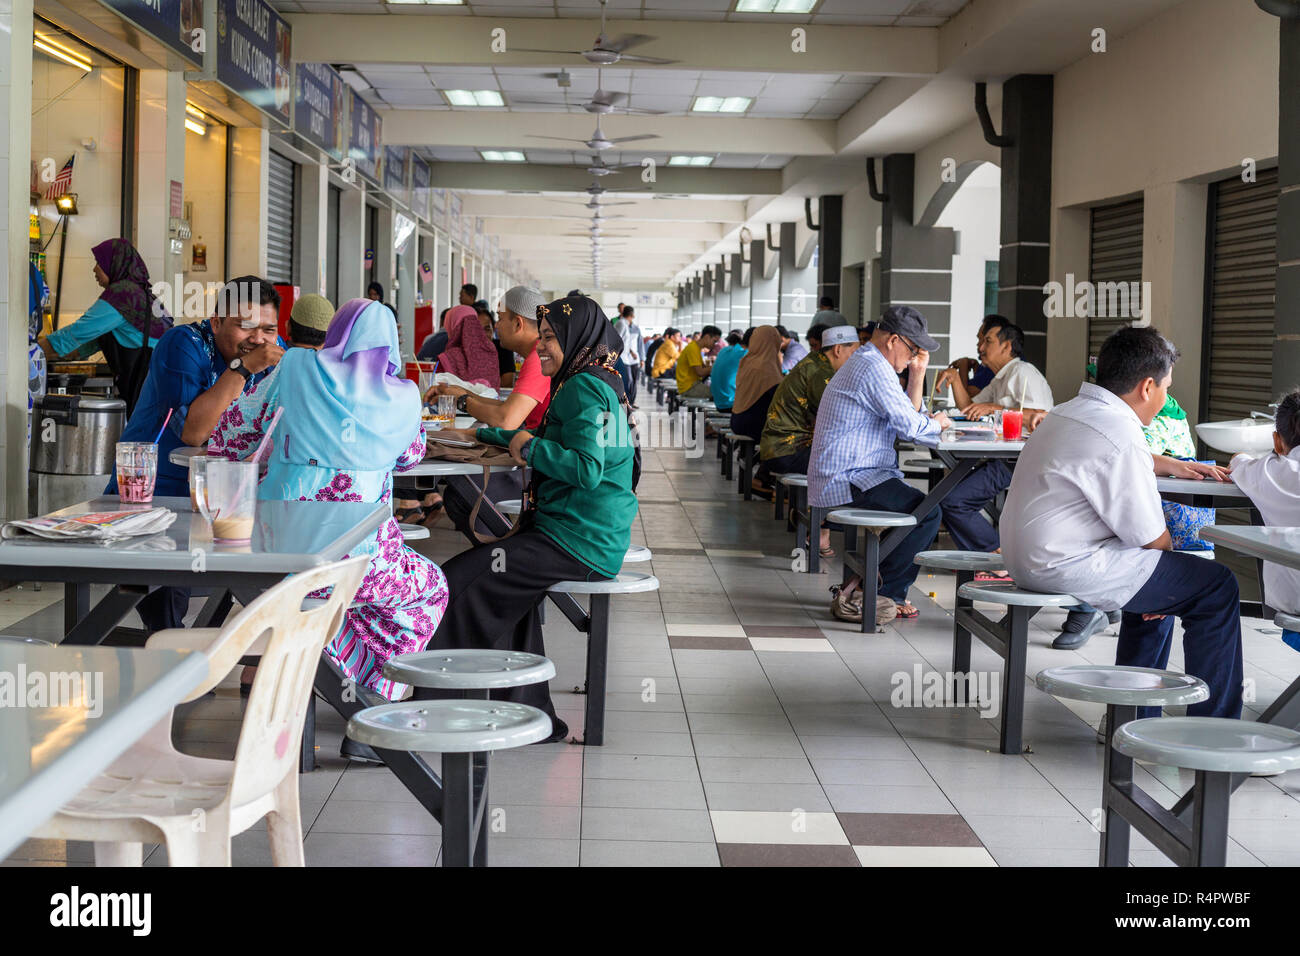 Diners Having Lunch, Individual Food Vendors on Left.  Ipoh, Malaysia. Stock Photo